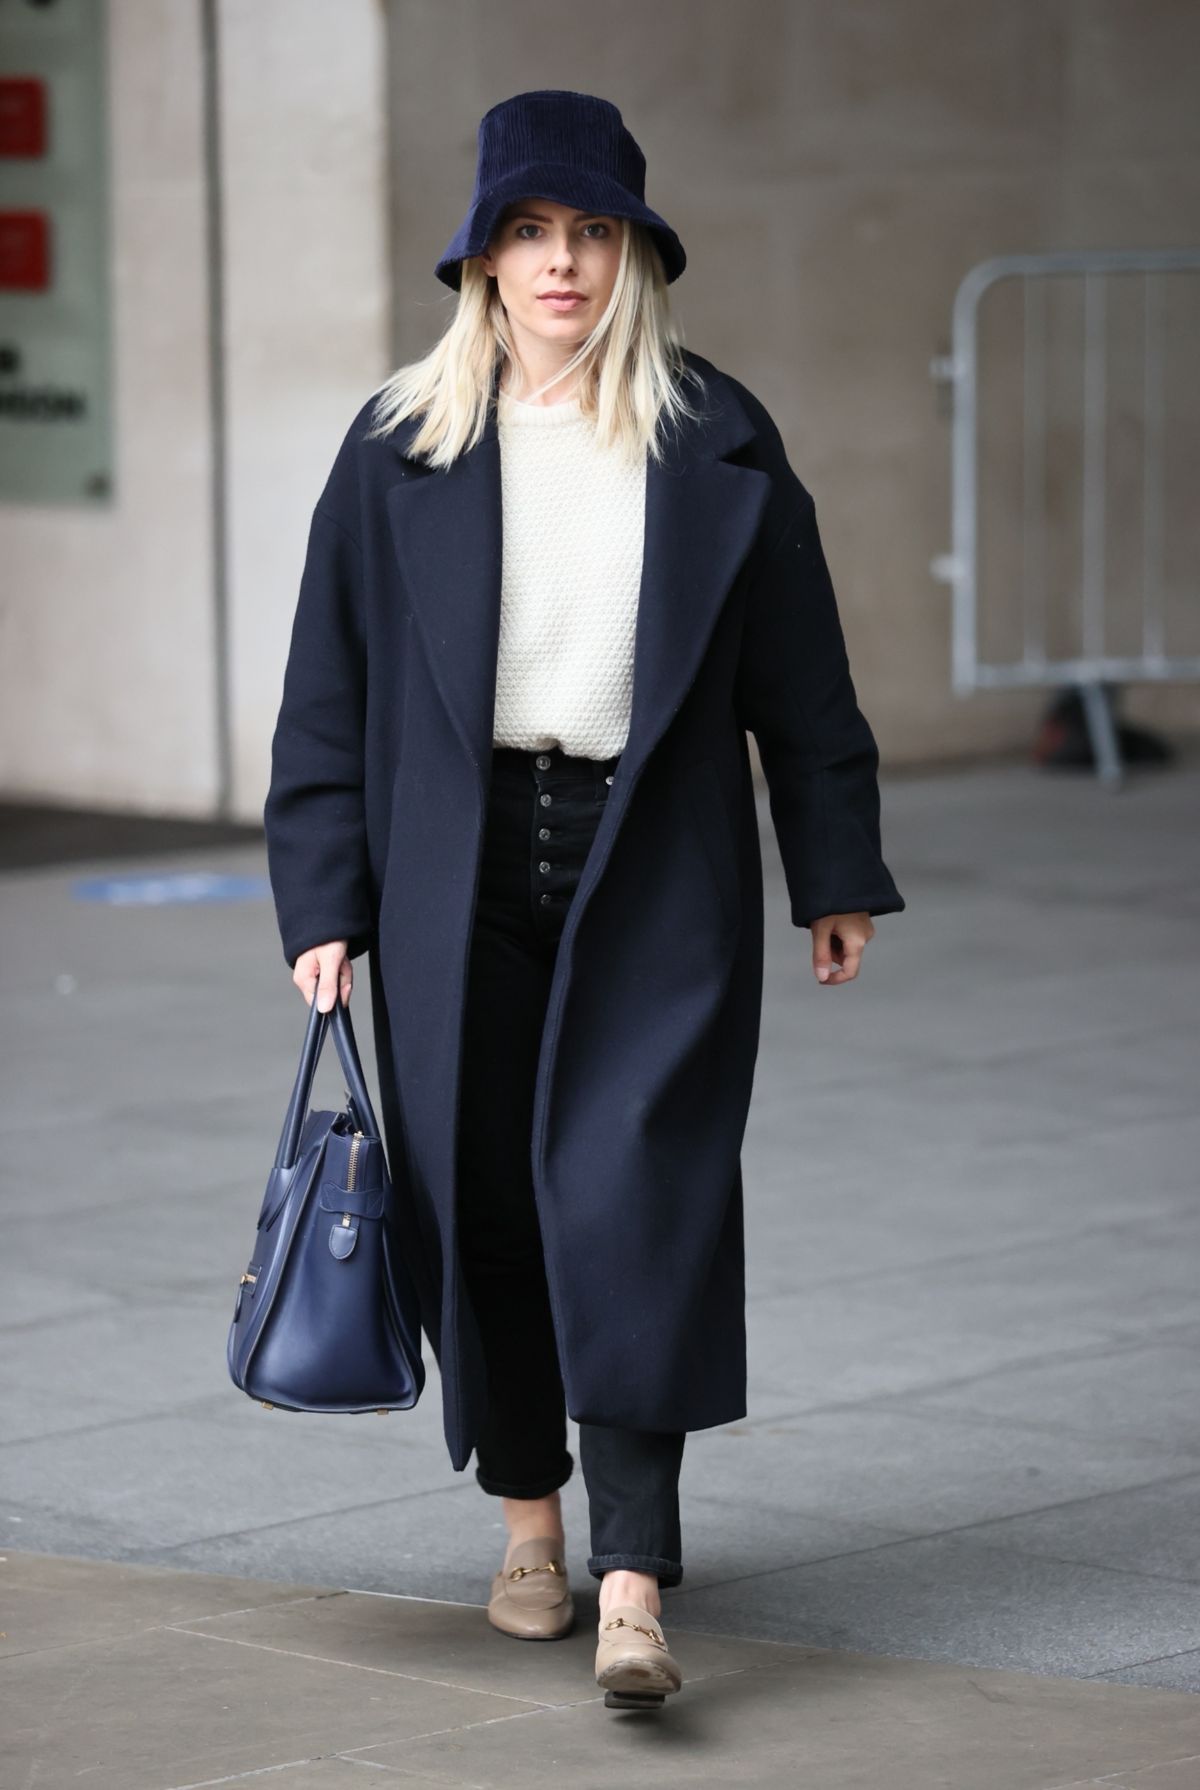 Mollie King Arrives at BBC Studios in London 2020/10/24 9